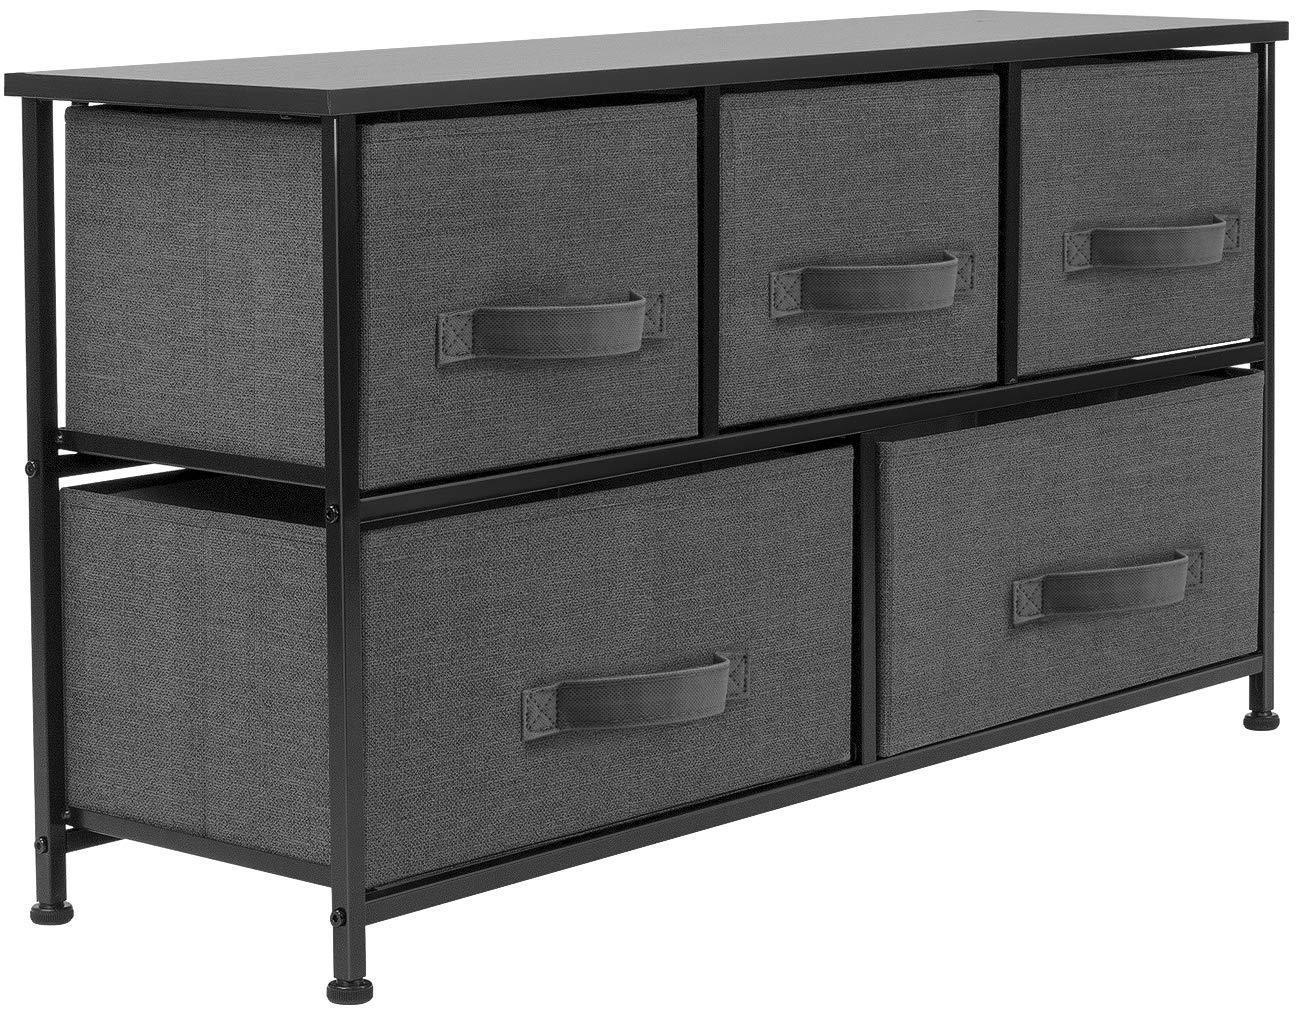 Best sorbus dresser with drawers furniture storage tower unit for bedroom hallway closet office organization steel frame wood top easy pull fabric bins 5 drawer black charcoal